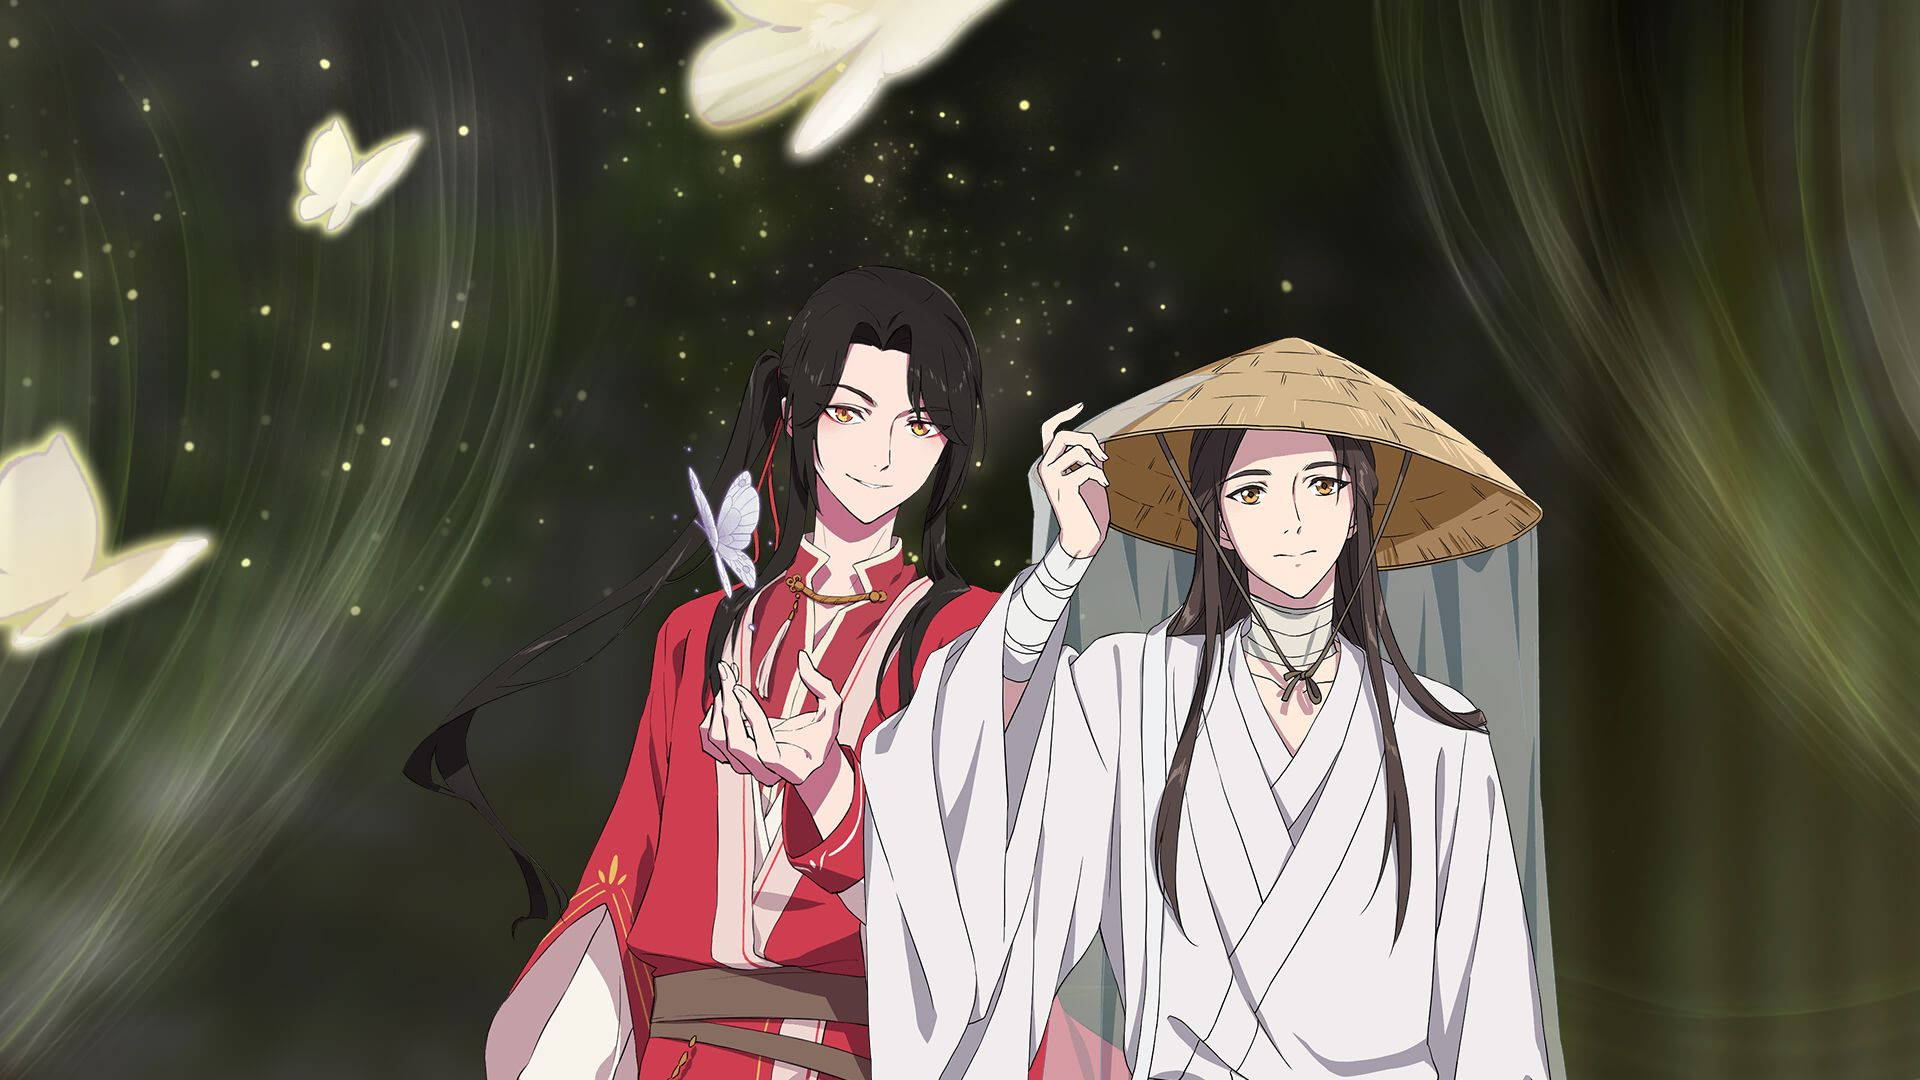 Hua Cheng And Xie With Butterflies